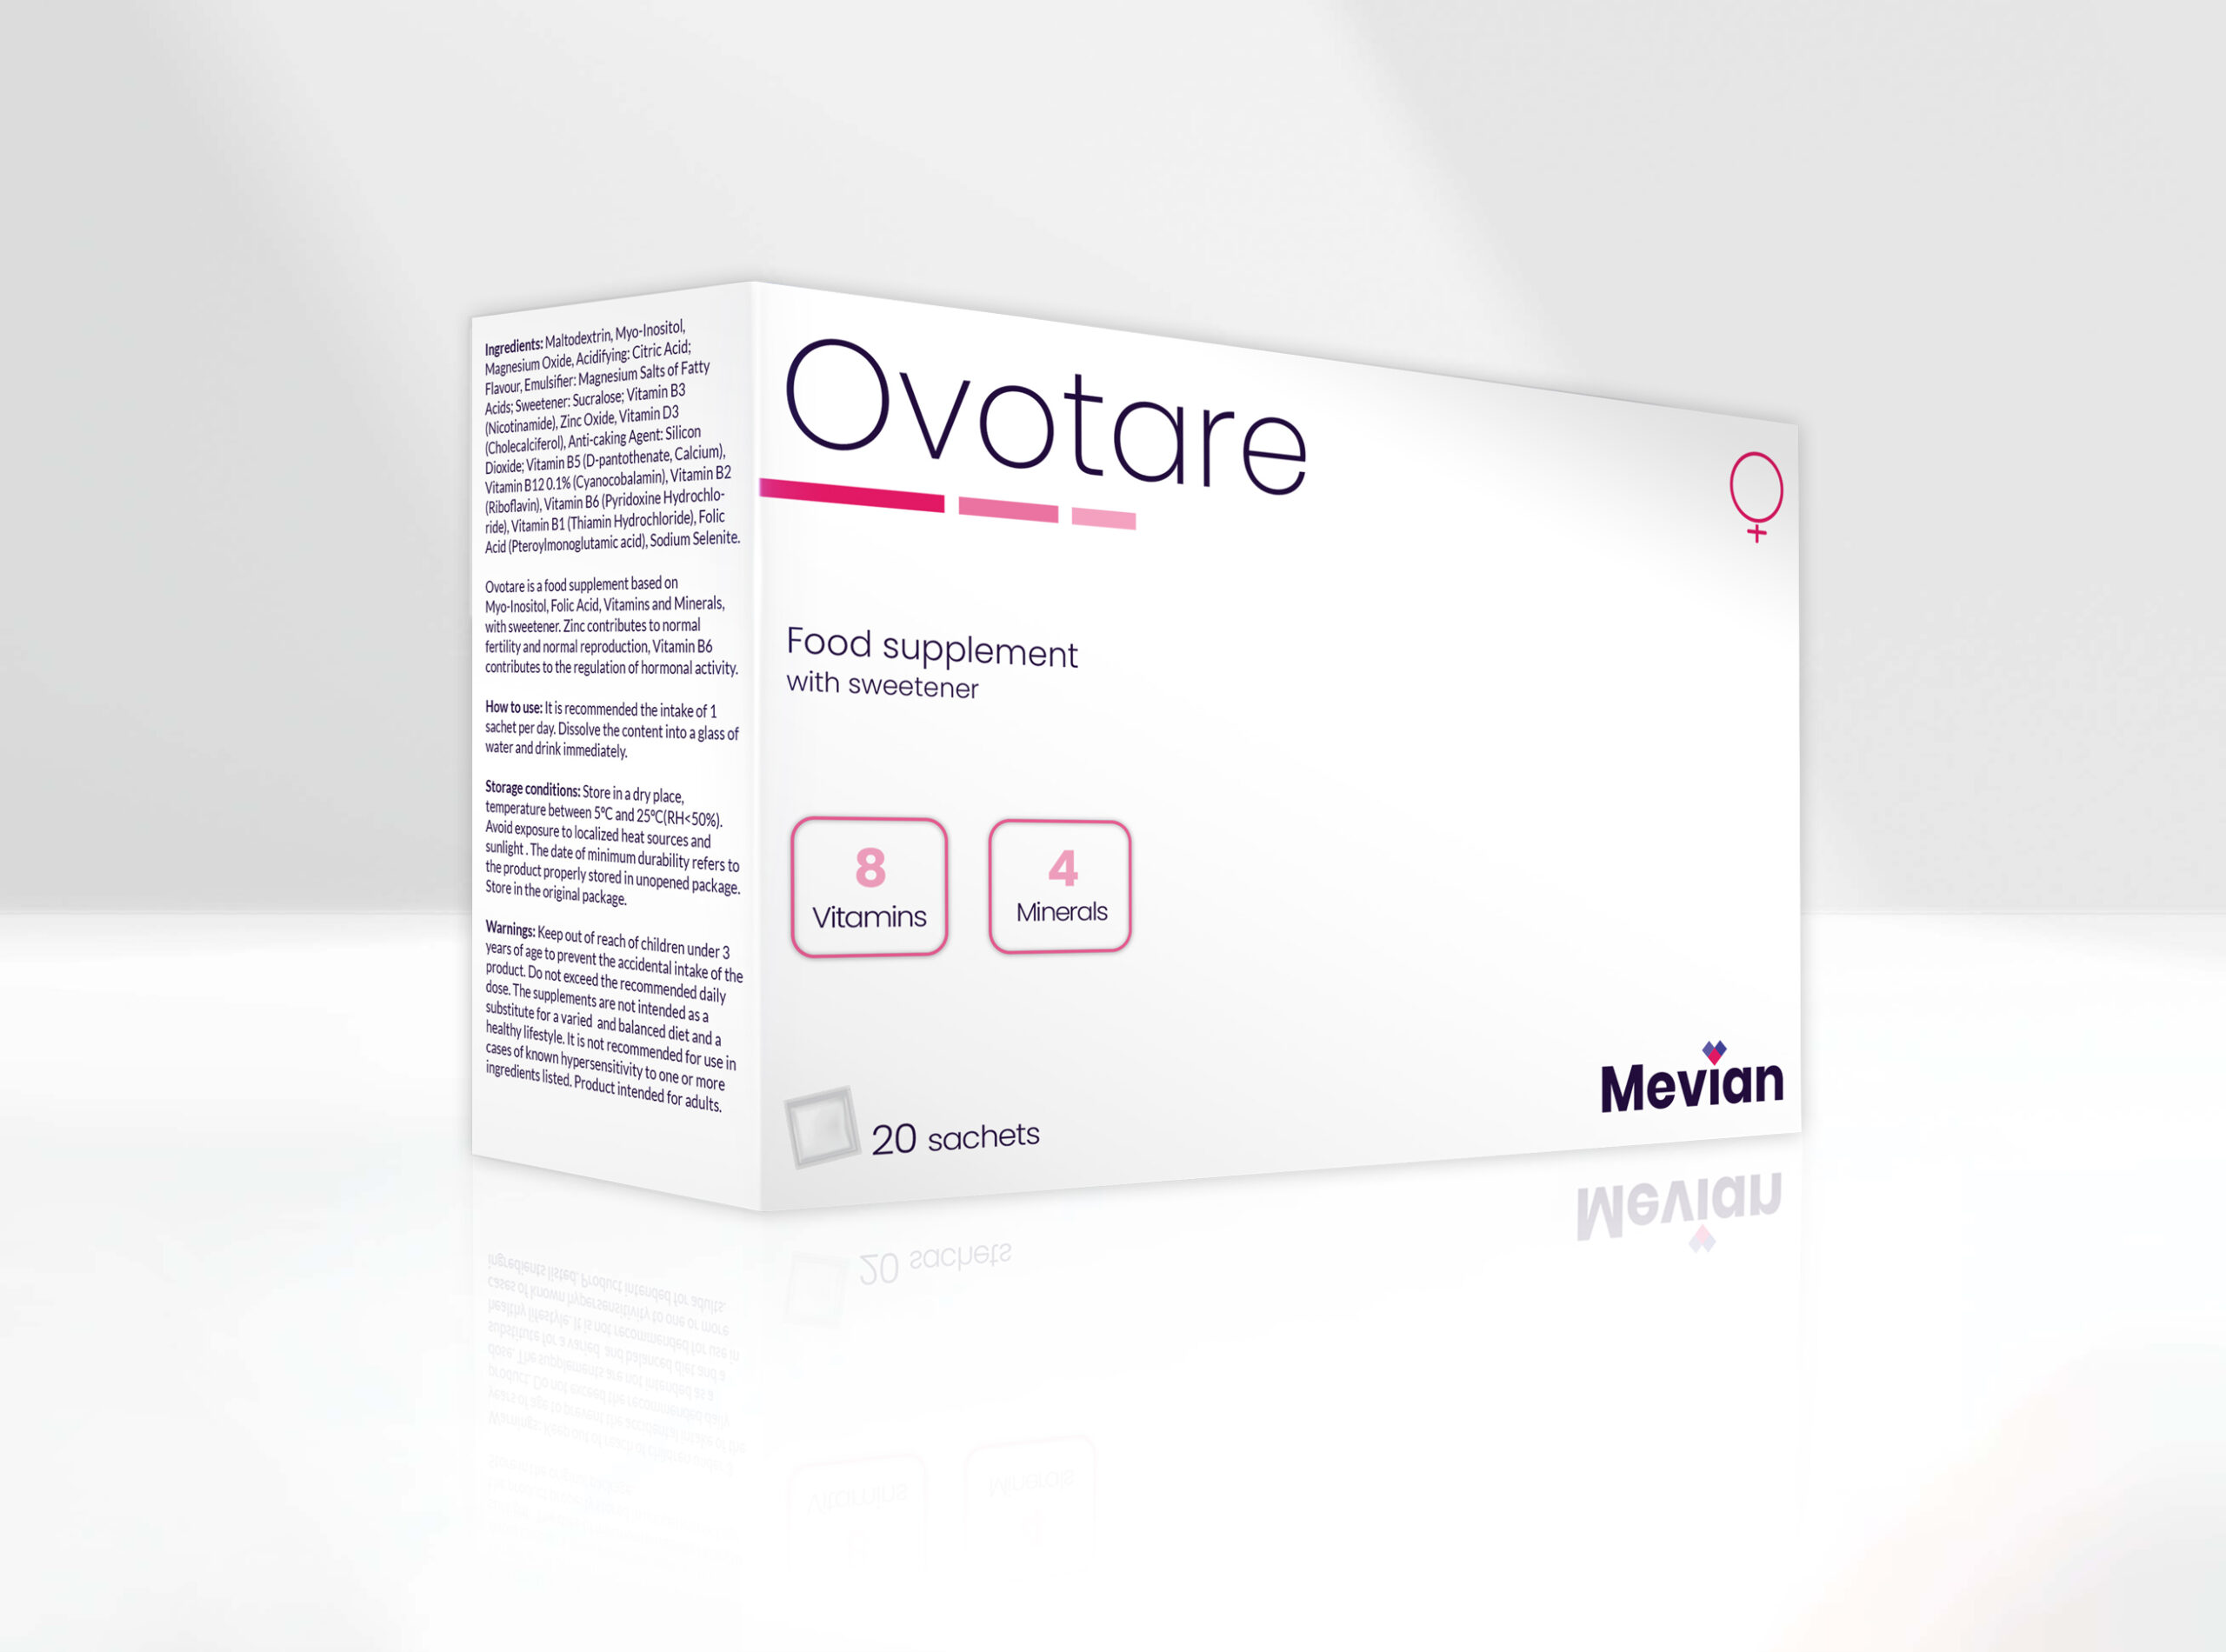 ''Ovotare is a clinically proven product that contributes highly to normal fertility and normal reproduction for females. Specialized for Polycystic ovary syndrome to mitigate the difficulty of getting pregnant.''